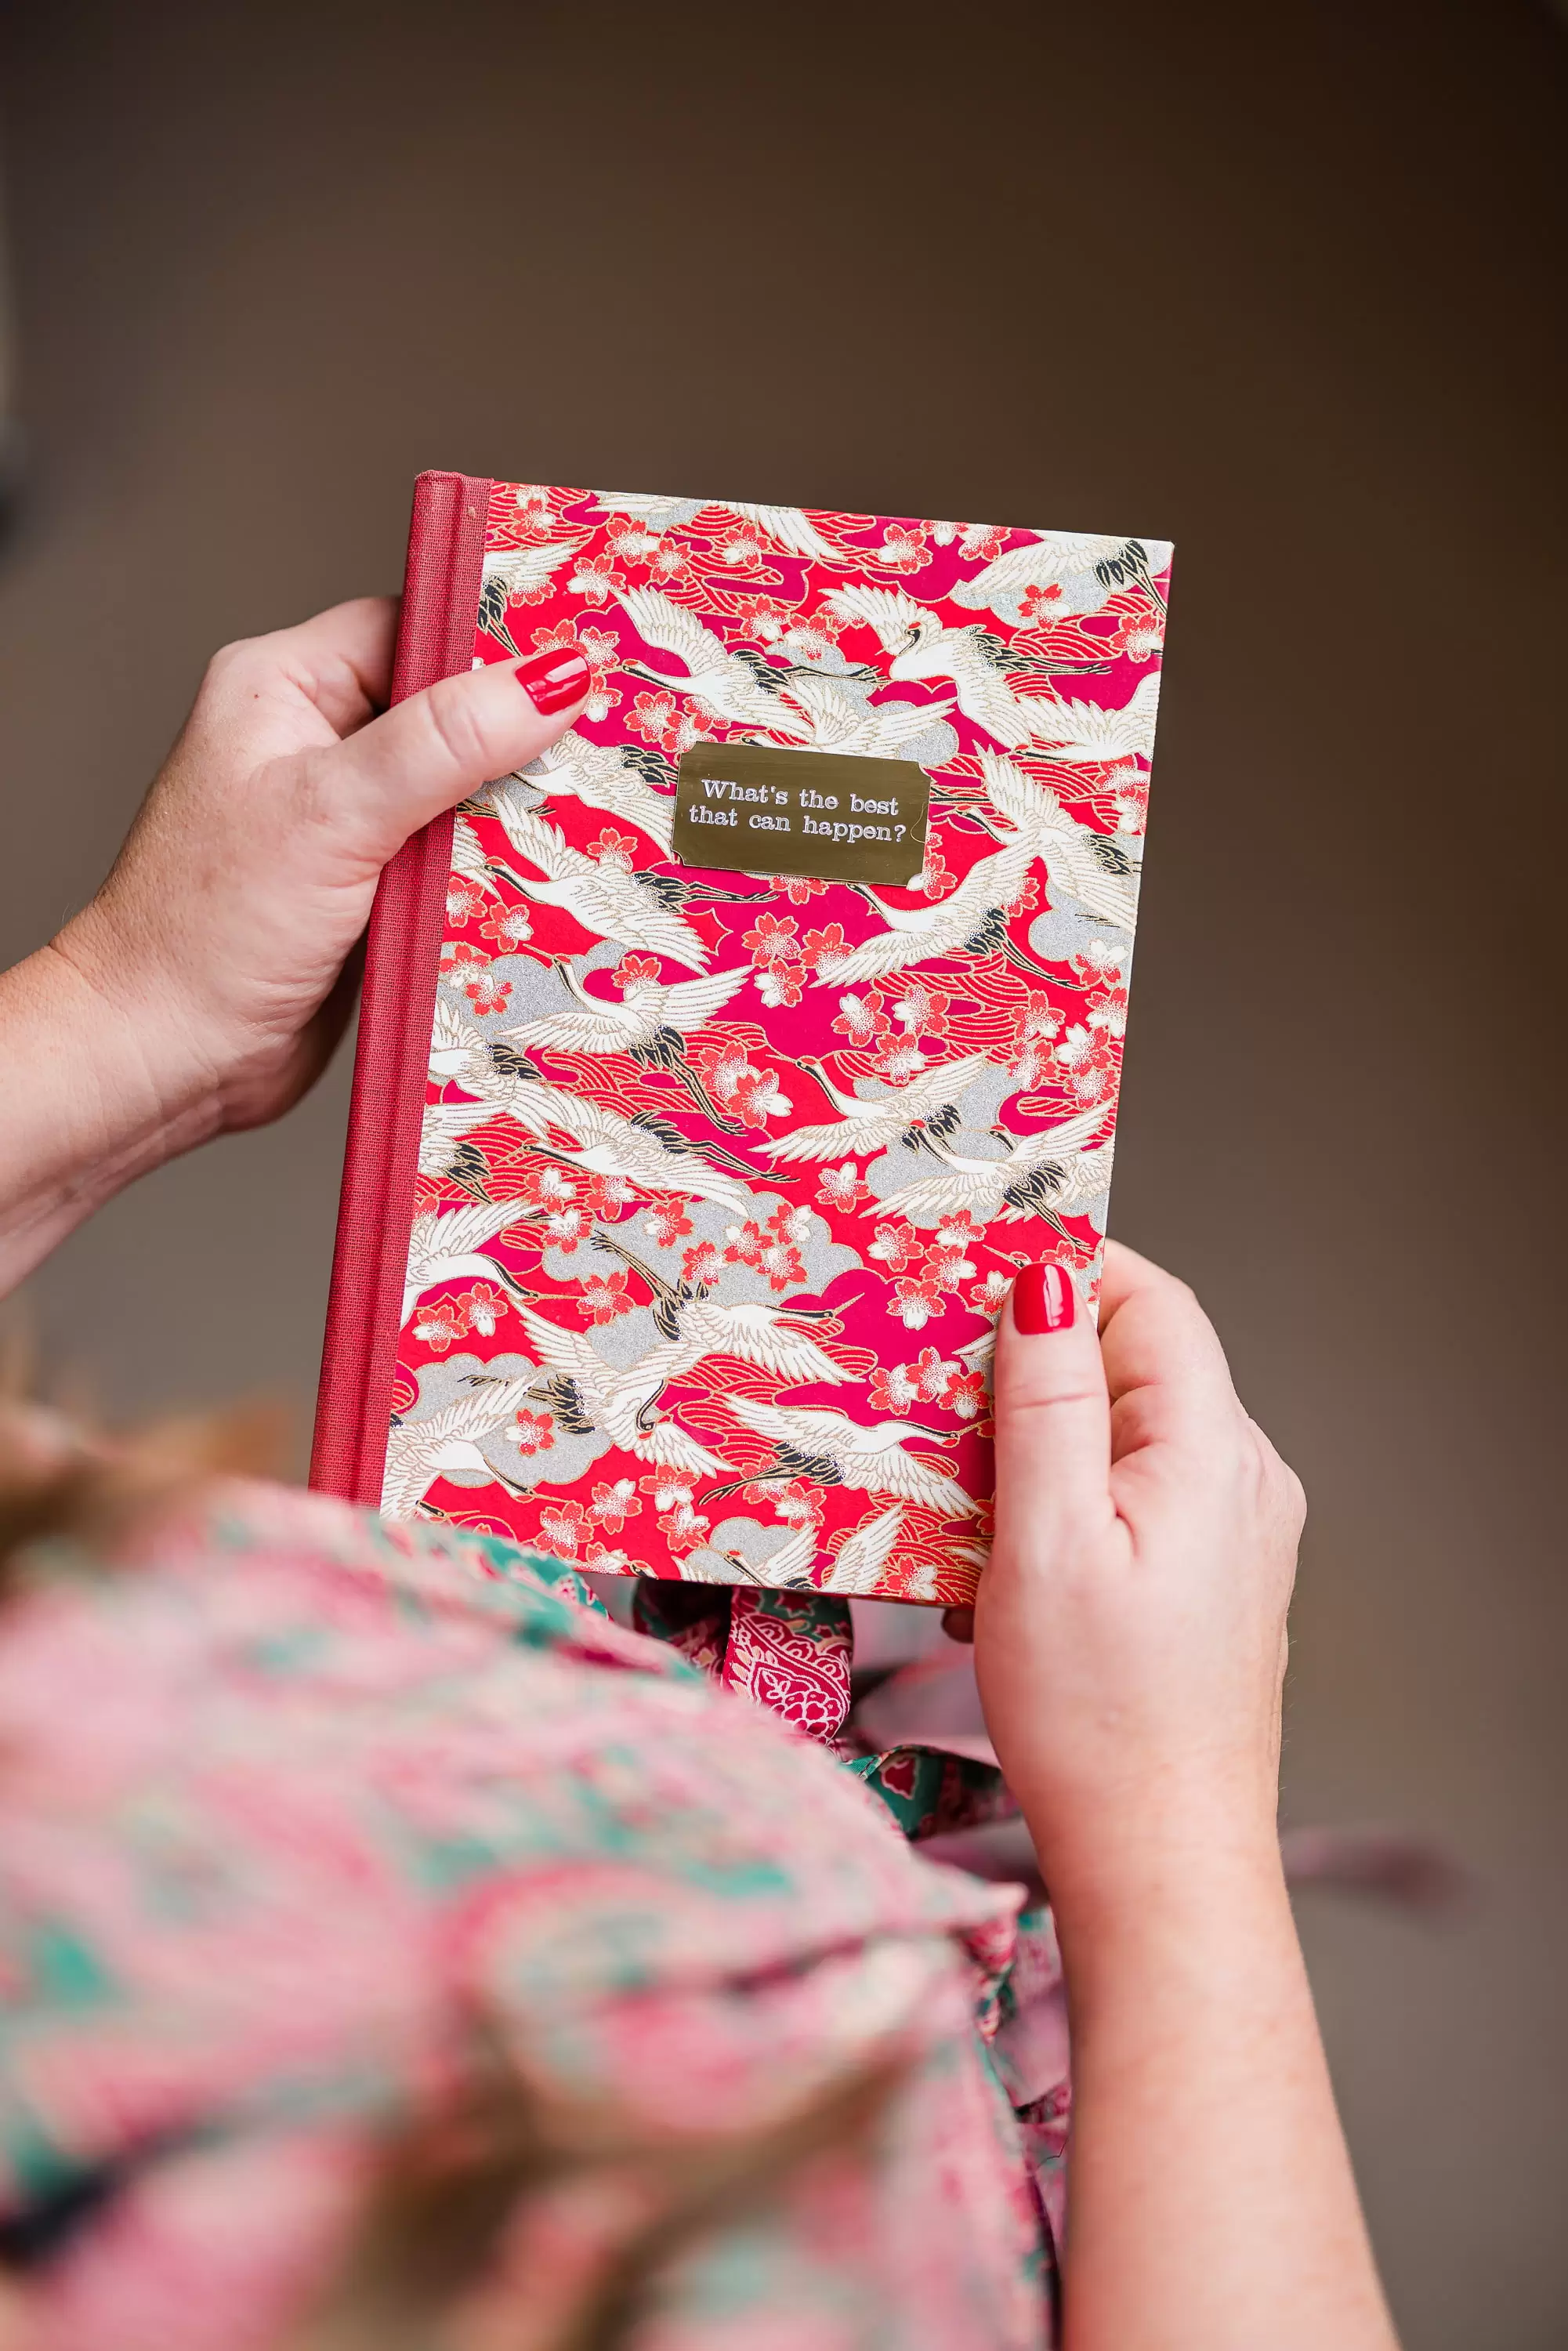 Hands holding a red and white marbled notebook with the words what's the best that can happen on the front